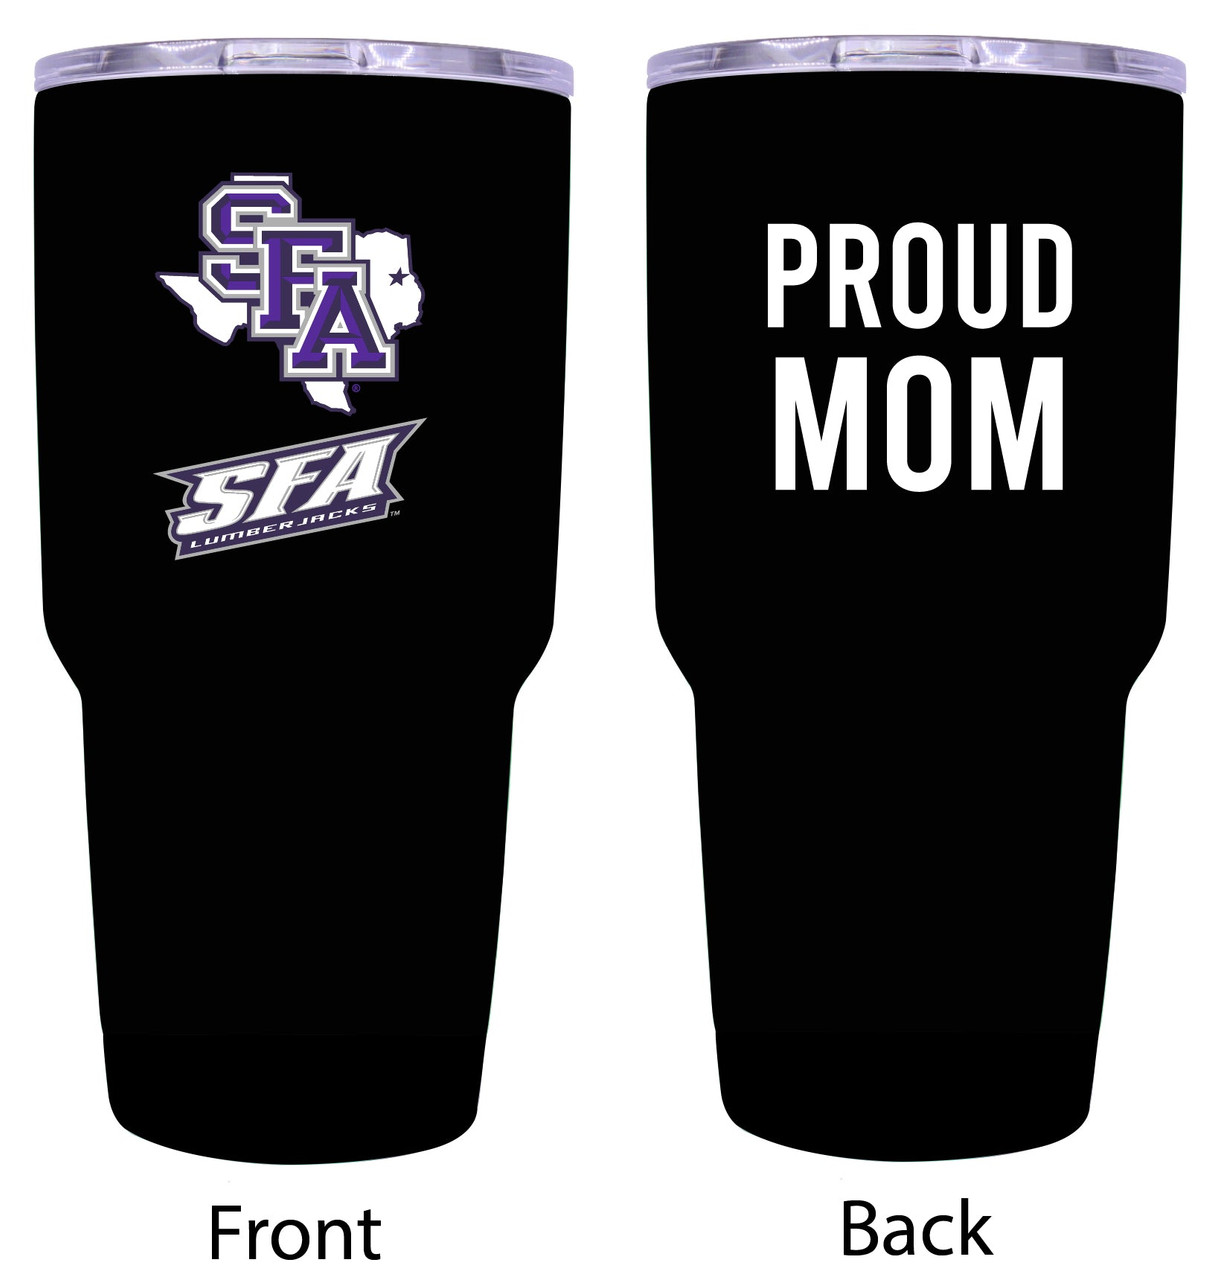 Stephen F. Austin State University Proud Mom 24 oz Insulated Stainless Steel Tumblers Choose Your Color.